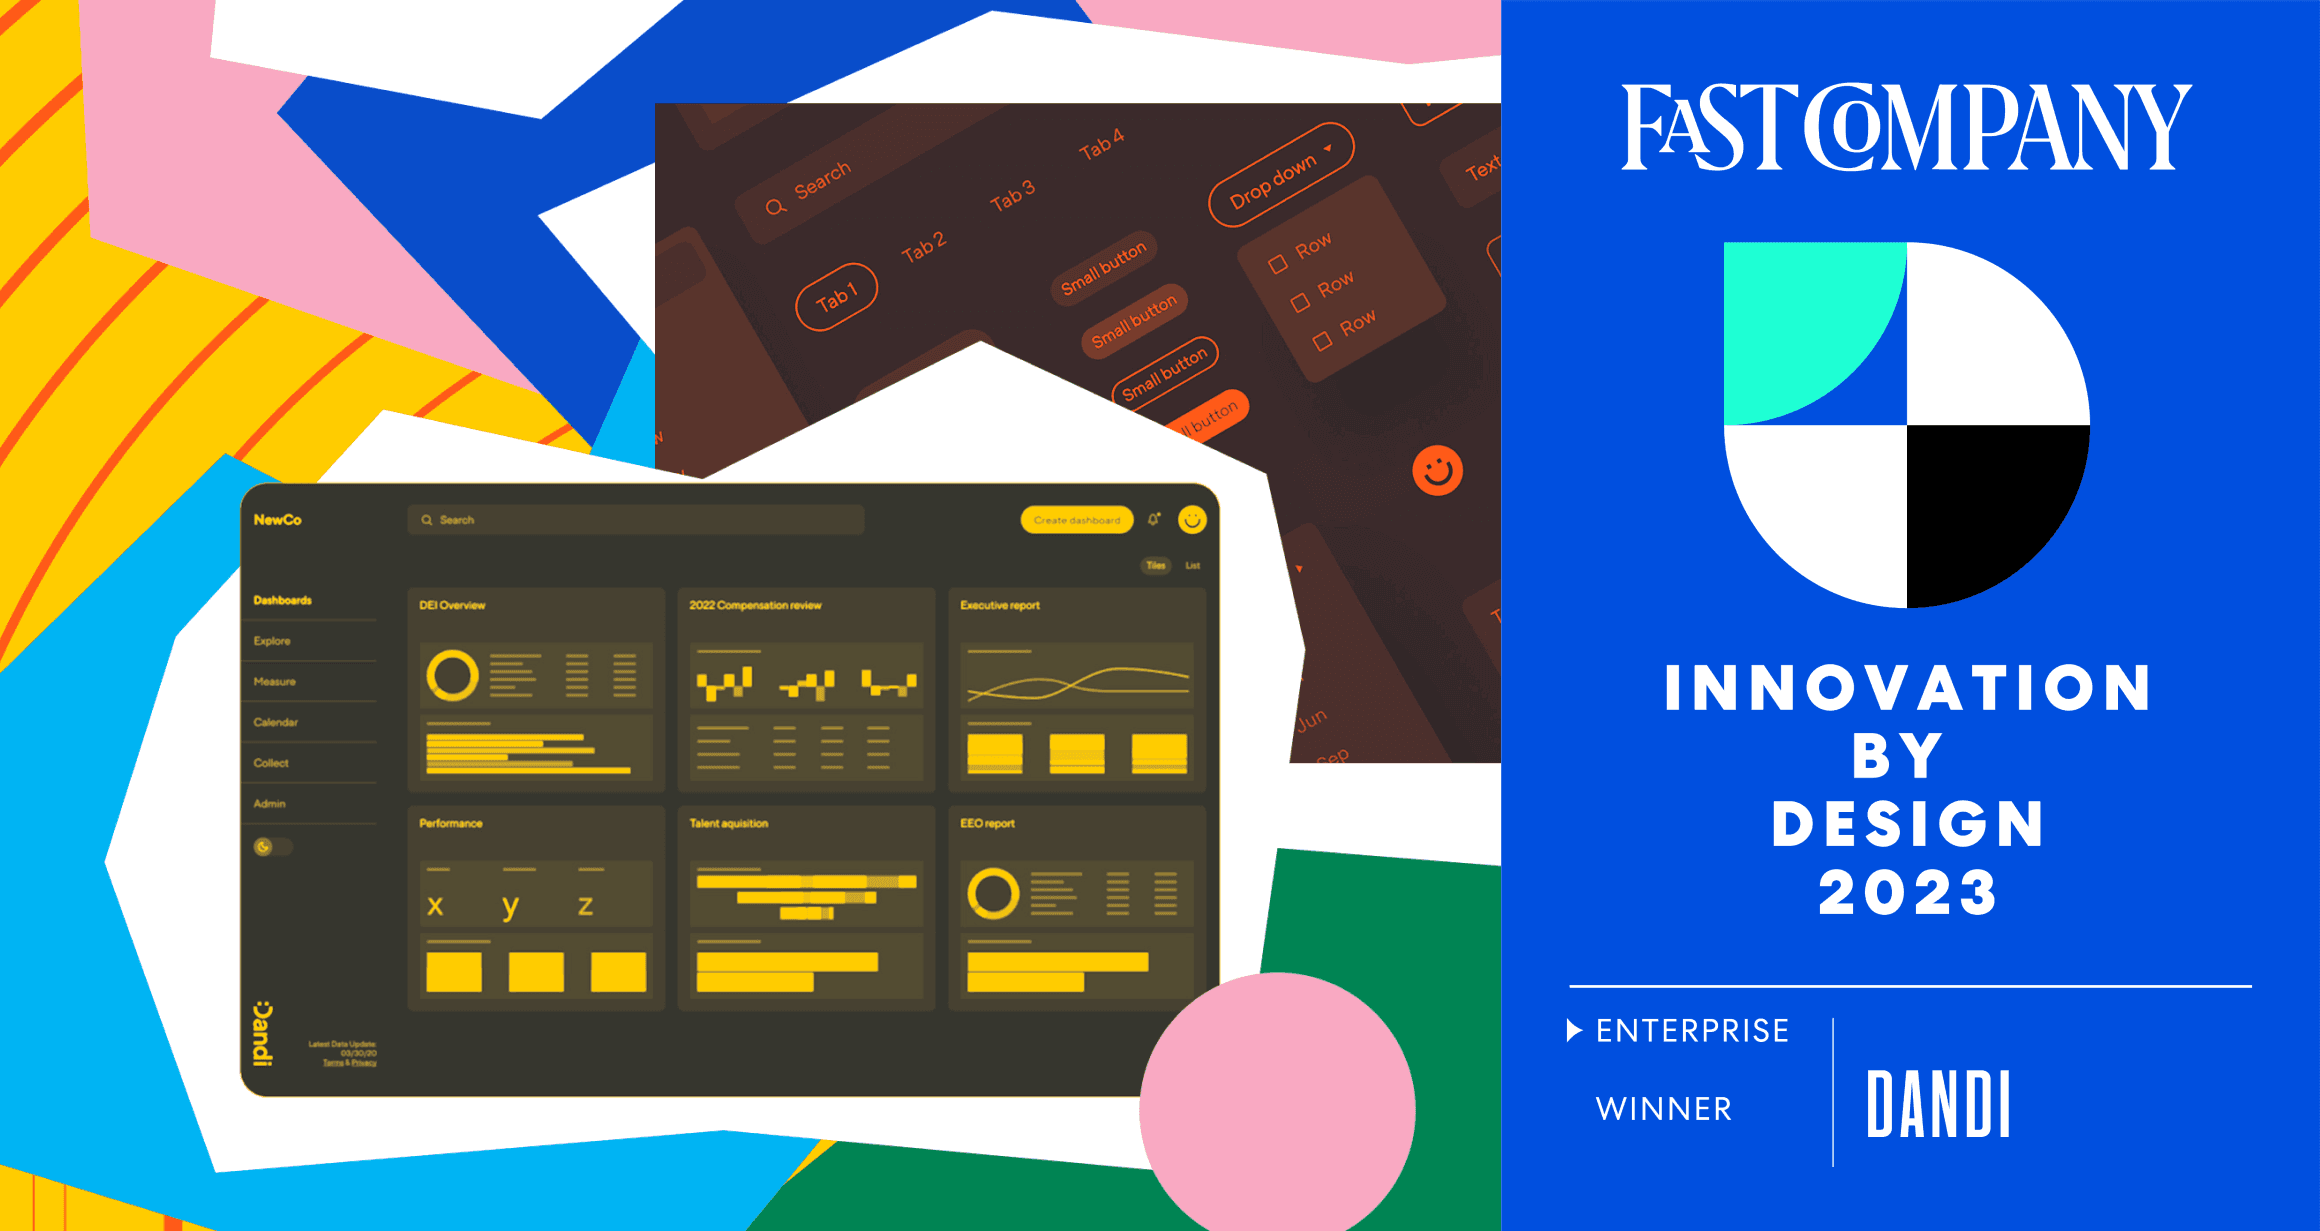 Text reads: Fast Company Innovation by Design 2023, Enterprise Winner: Dandi. To the left is a stylized illustration of Dandi dashboards.